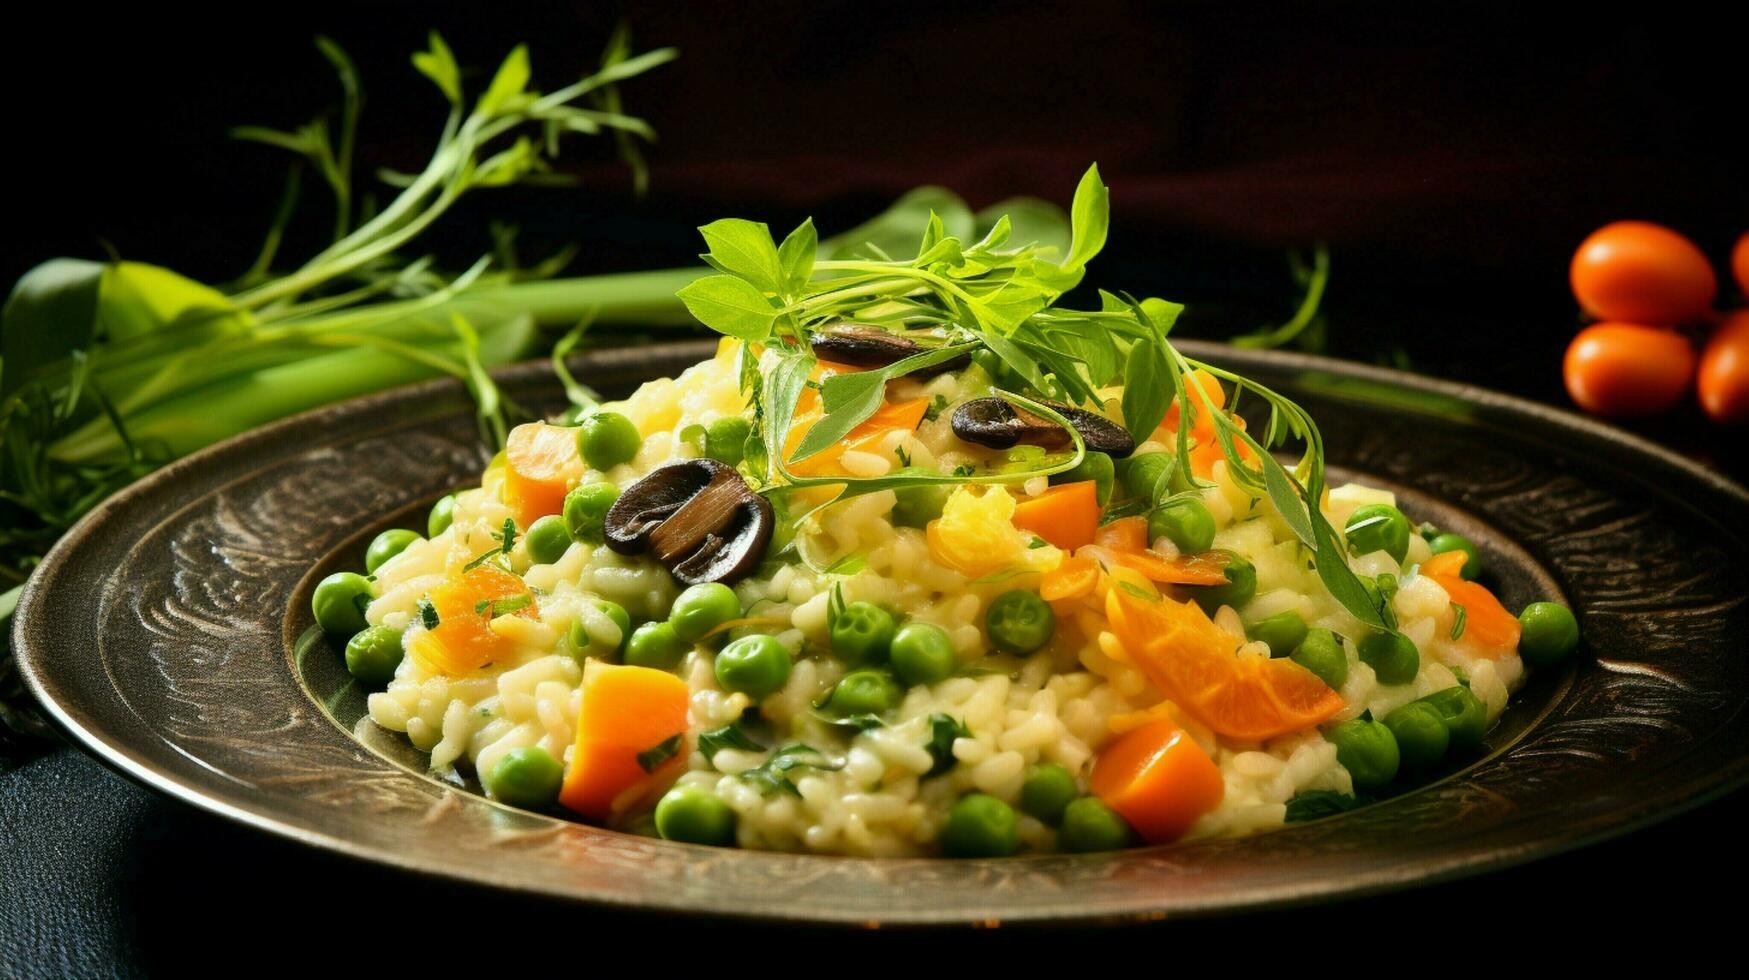 freshness and rustic gourmet meal cooked risotto photo